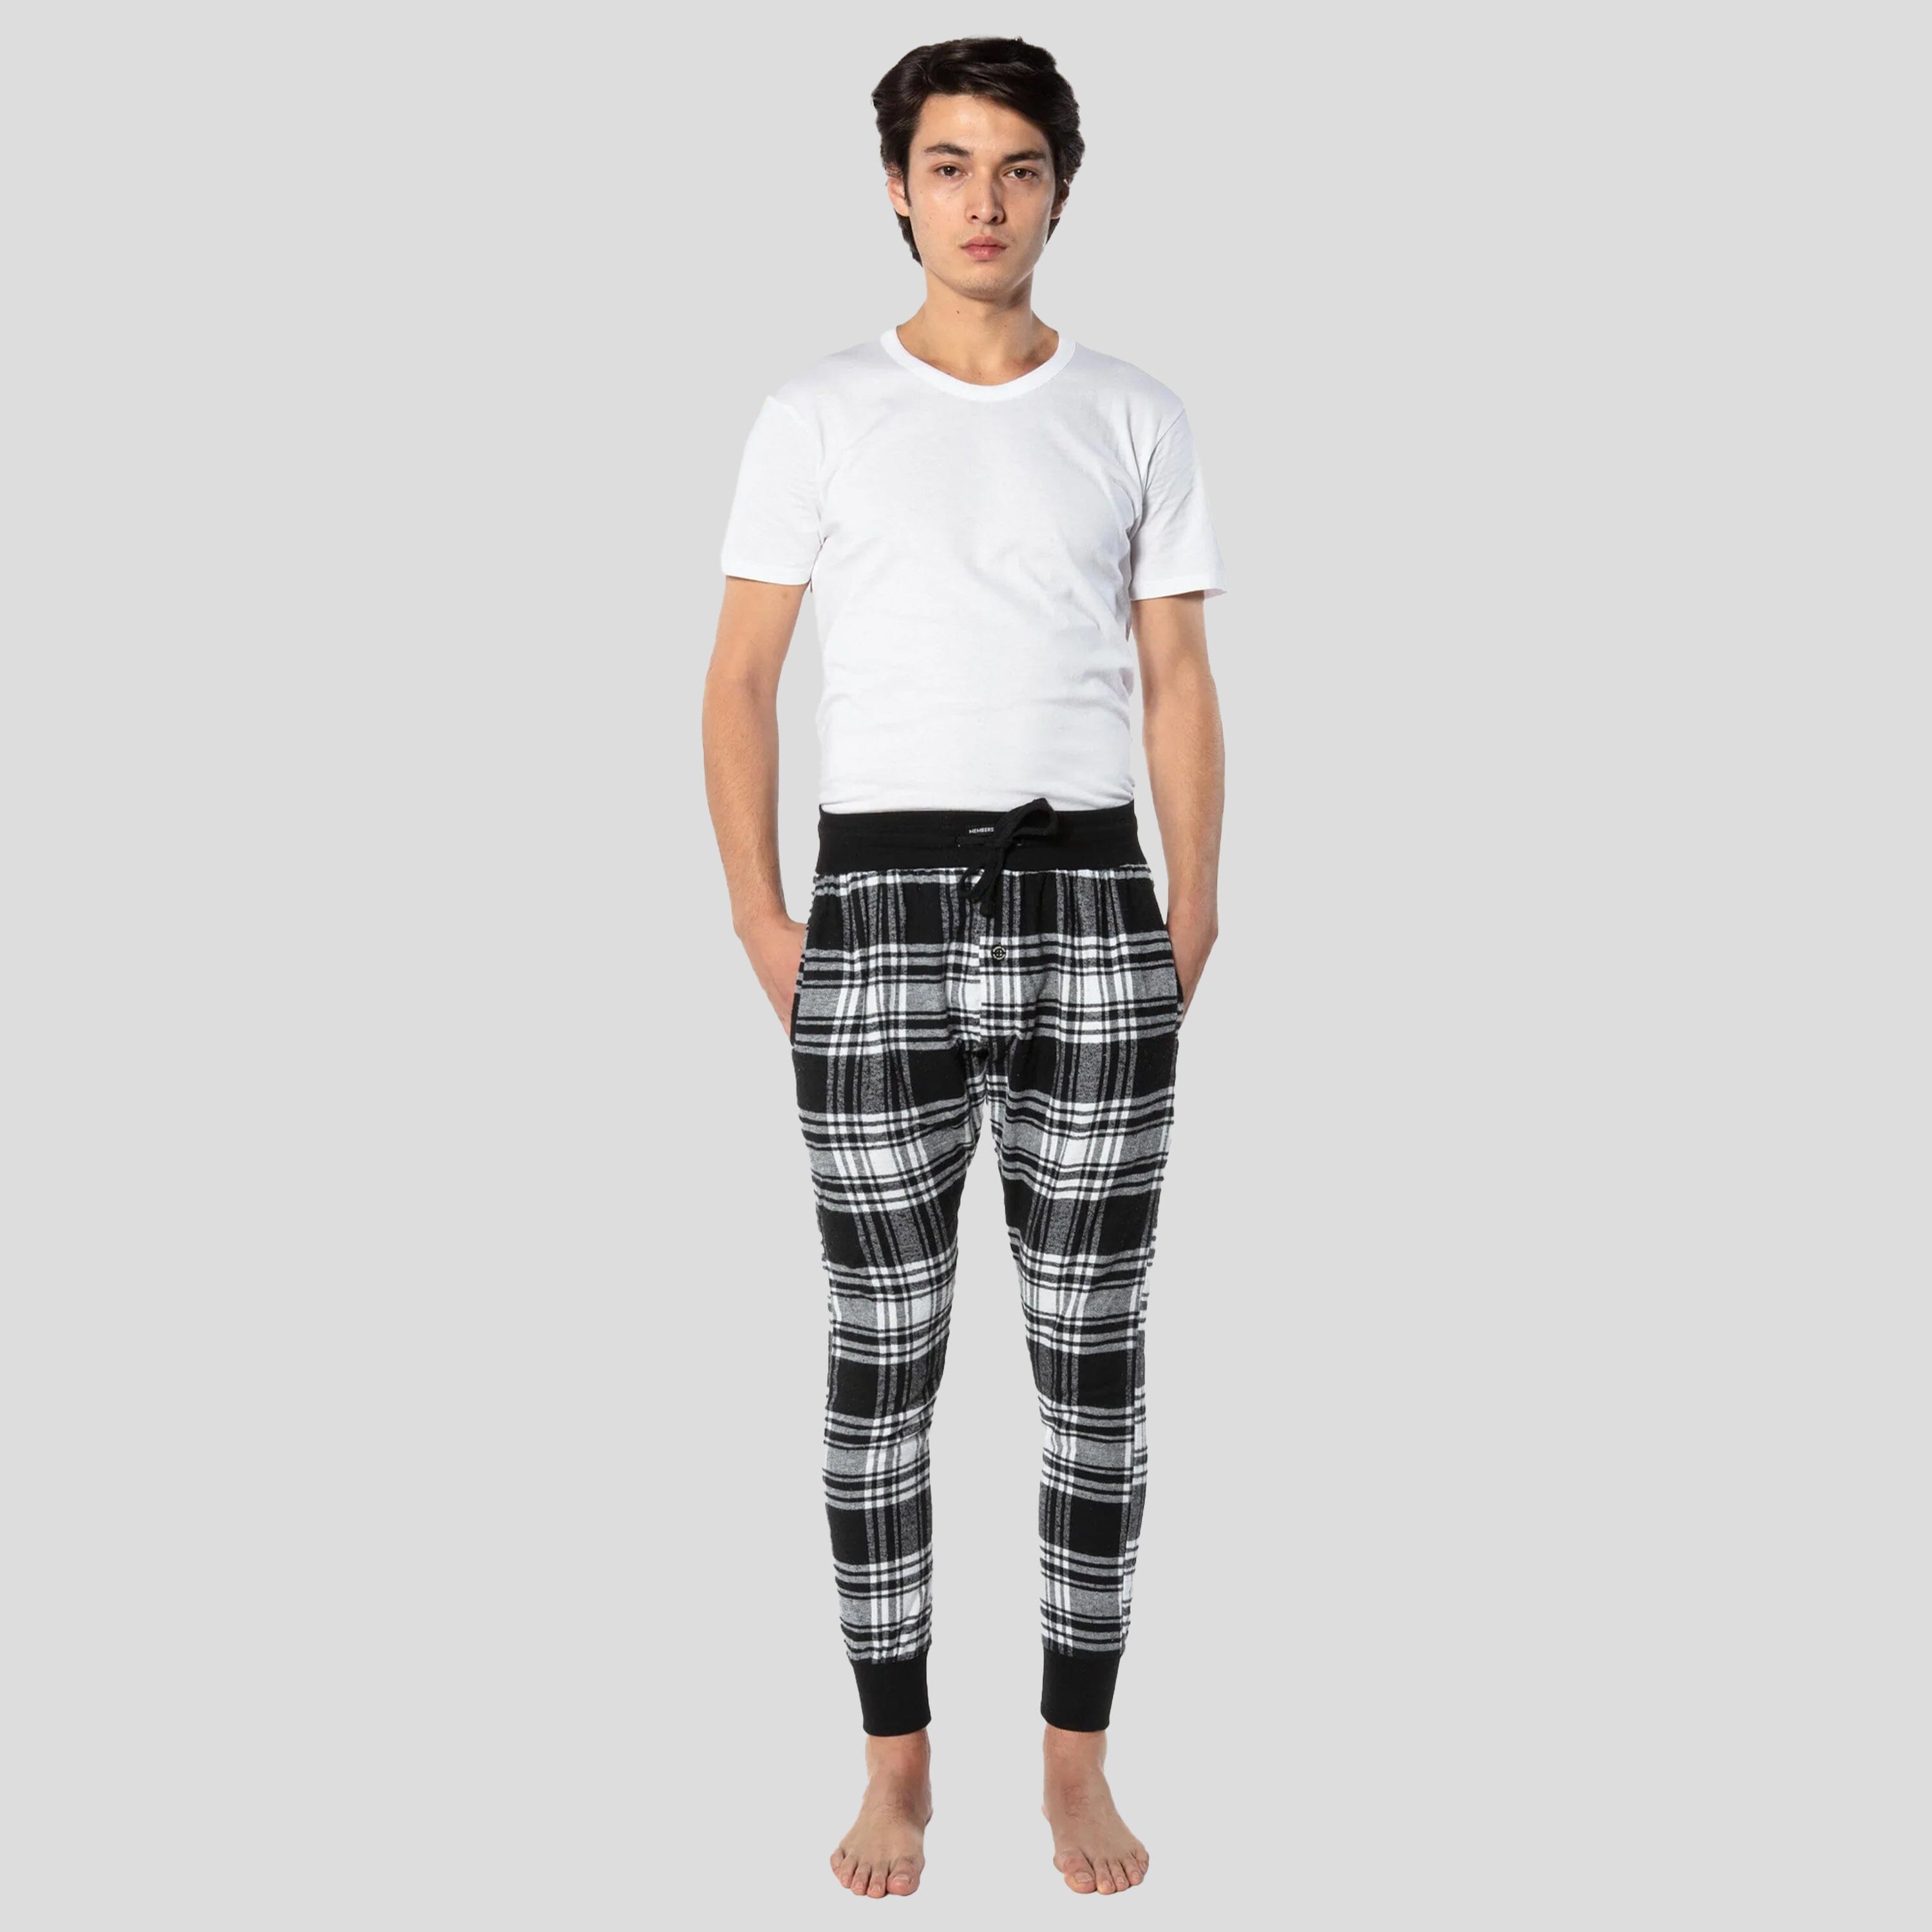 Members Only Men's Flannel Jogger Sleep Pant With Two Side Pockets - Cotton  Blend Soft & Breathable Loungewear For Men - Black/white Xl : Target